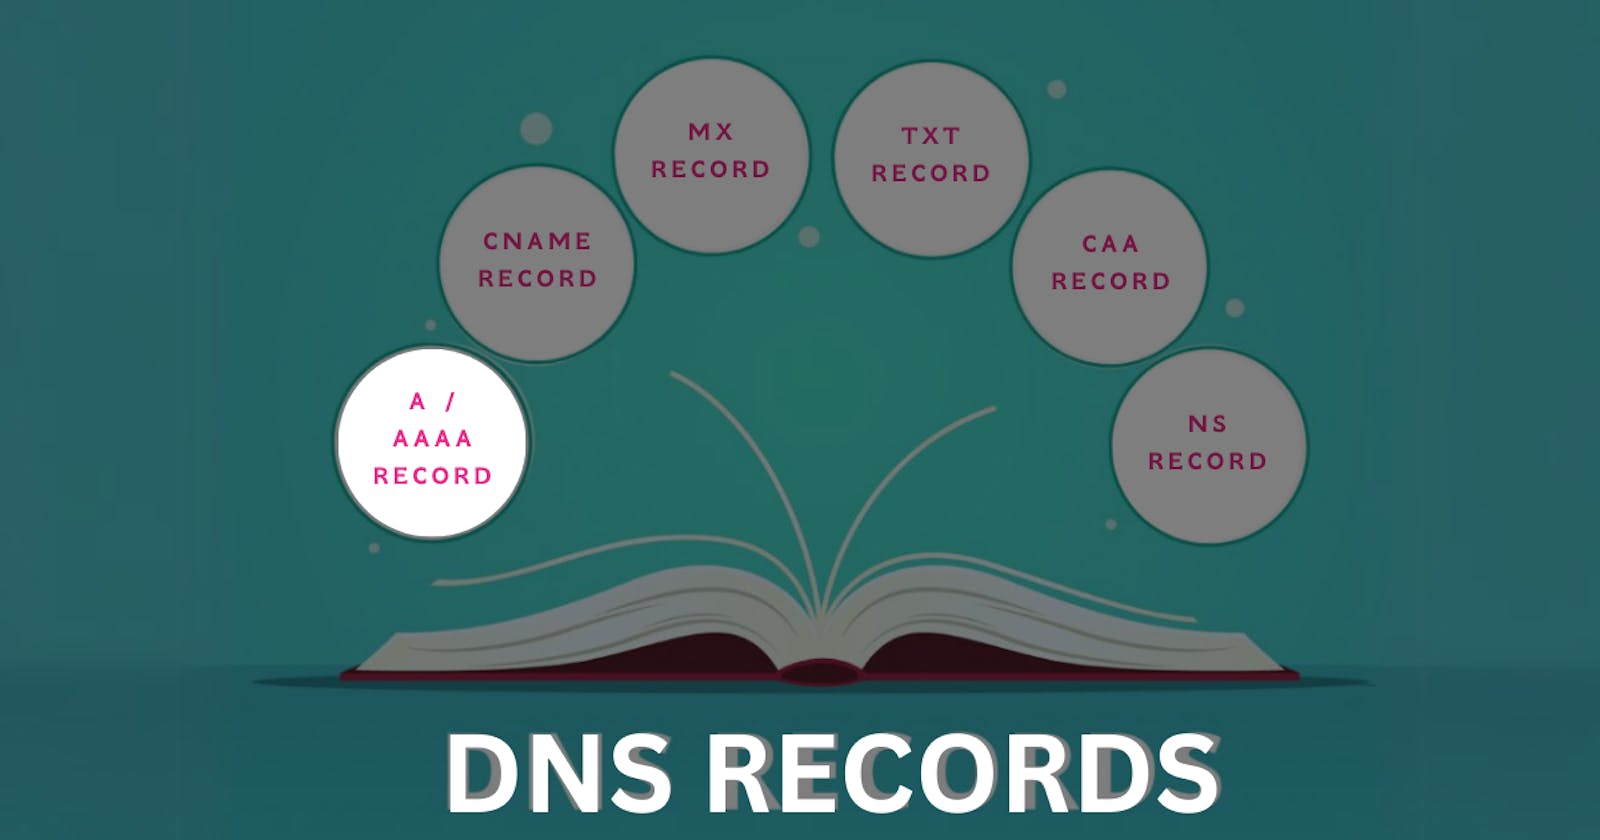 A Comprehensive Guide to A and AAAA Records in DNS